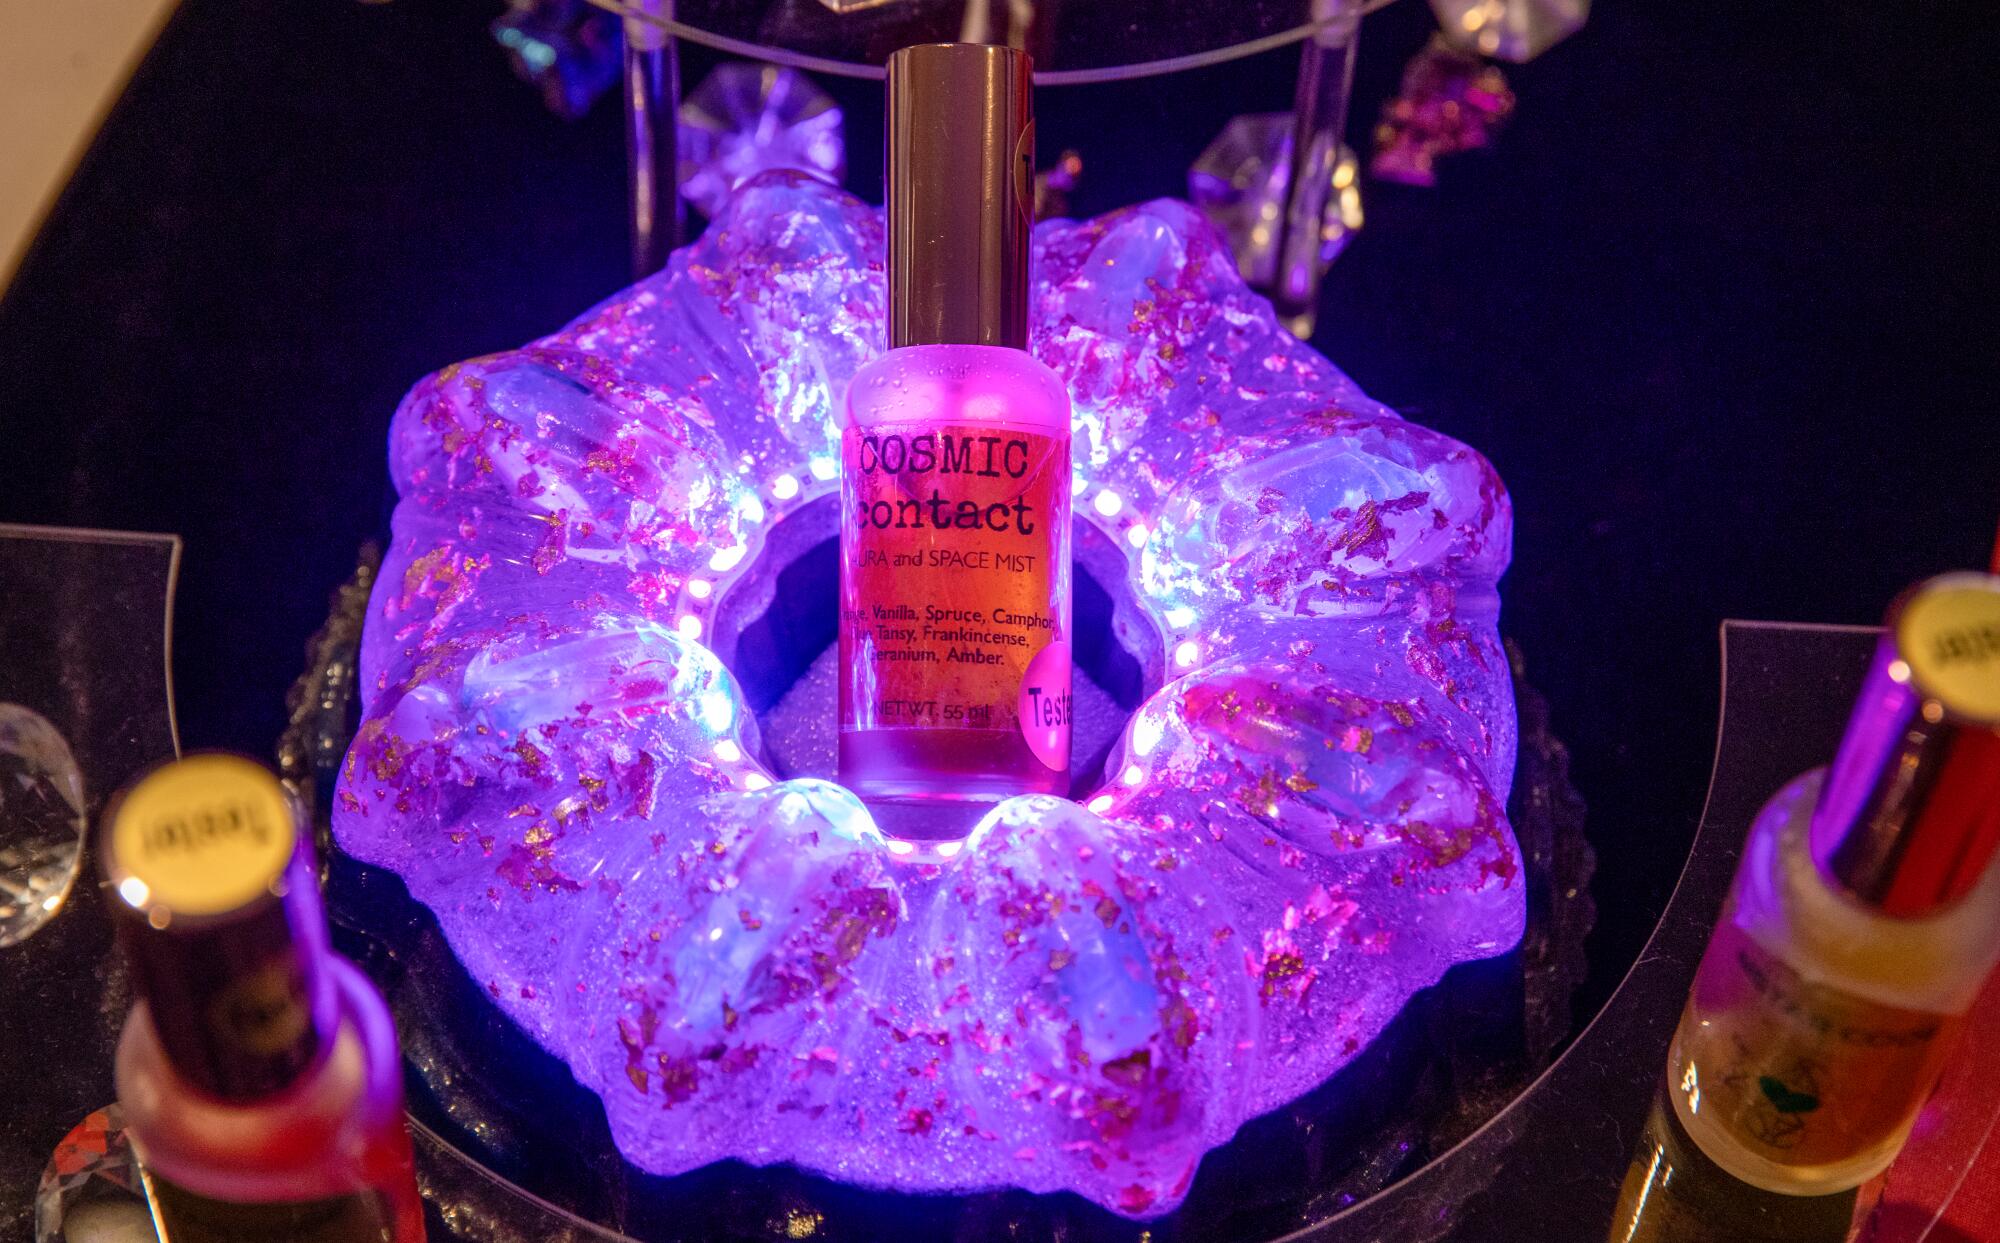 A spray bottle of Cosmic Contact set in a glowing purple doughnut-shaped display